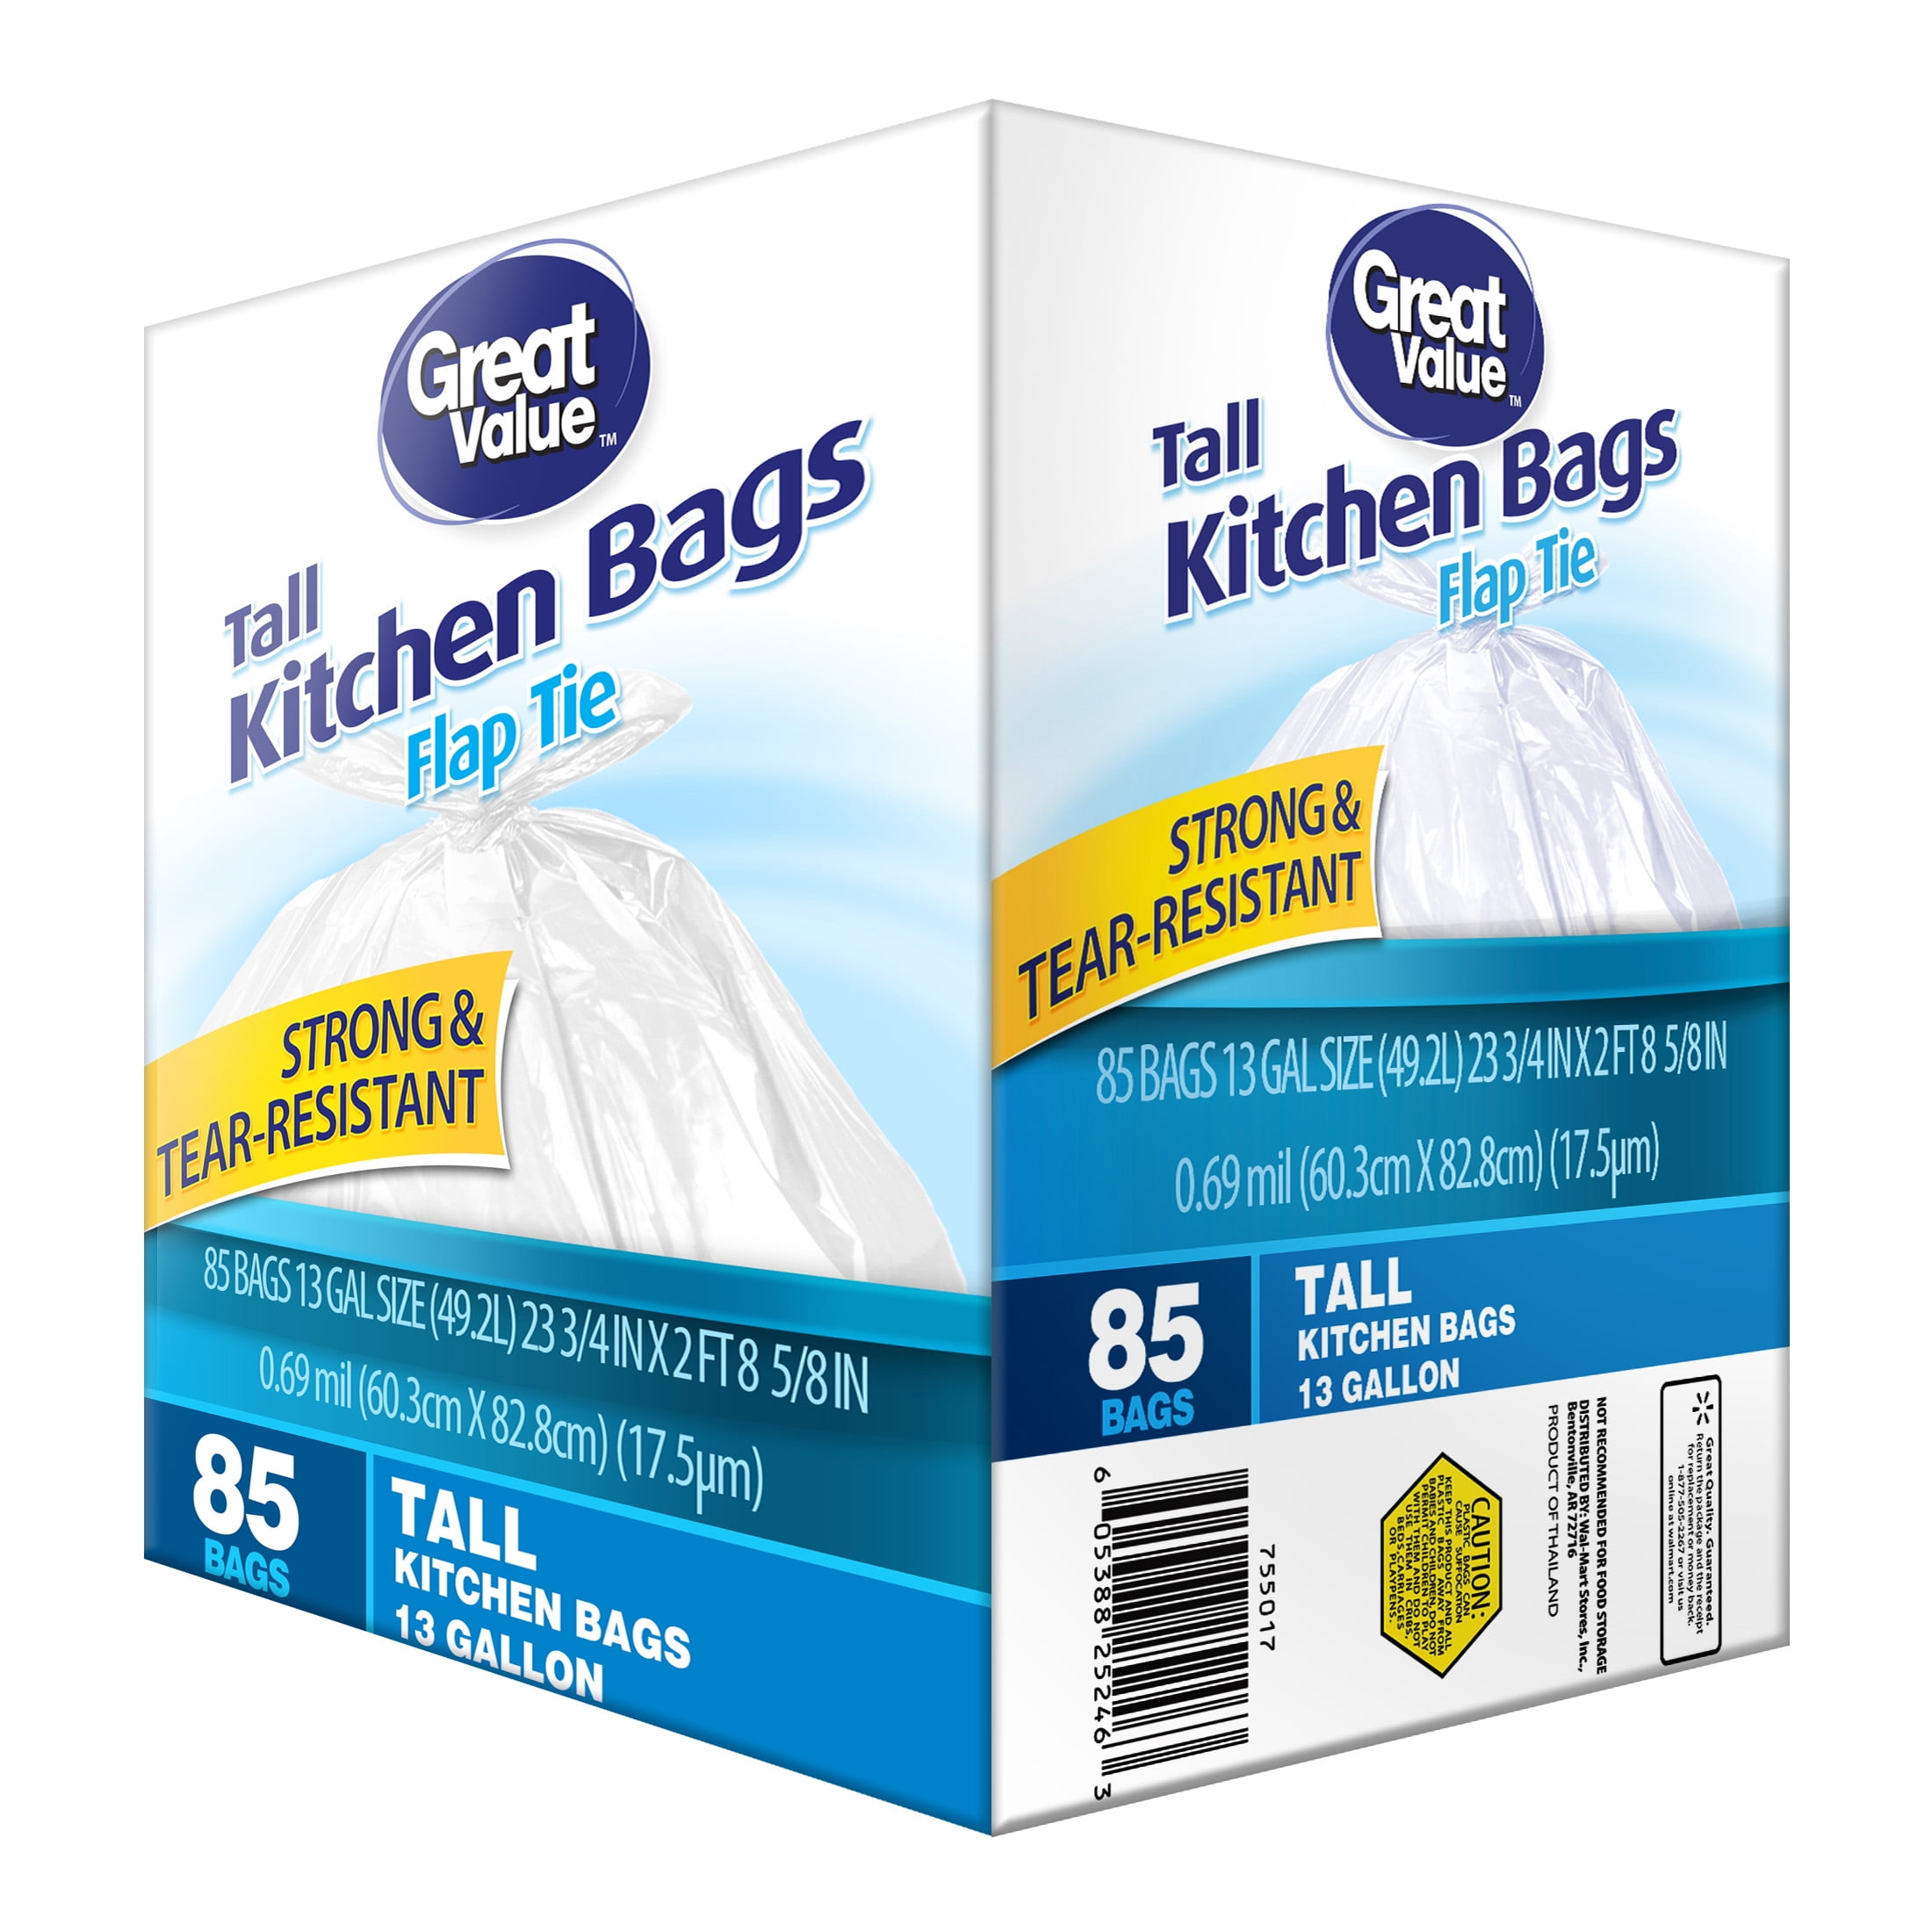 Home Base 13 gal Flap Tie Tall Kitchen Bags 80 ct, Trash Bags